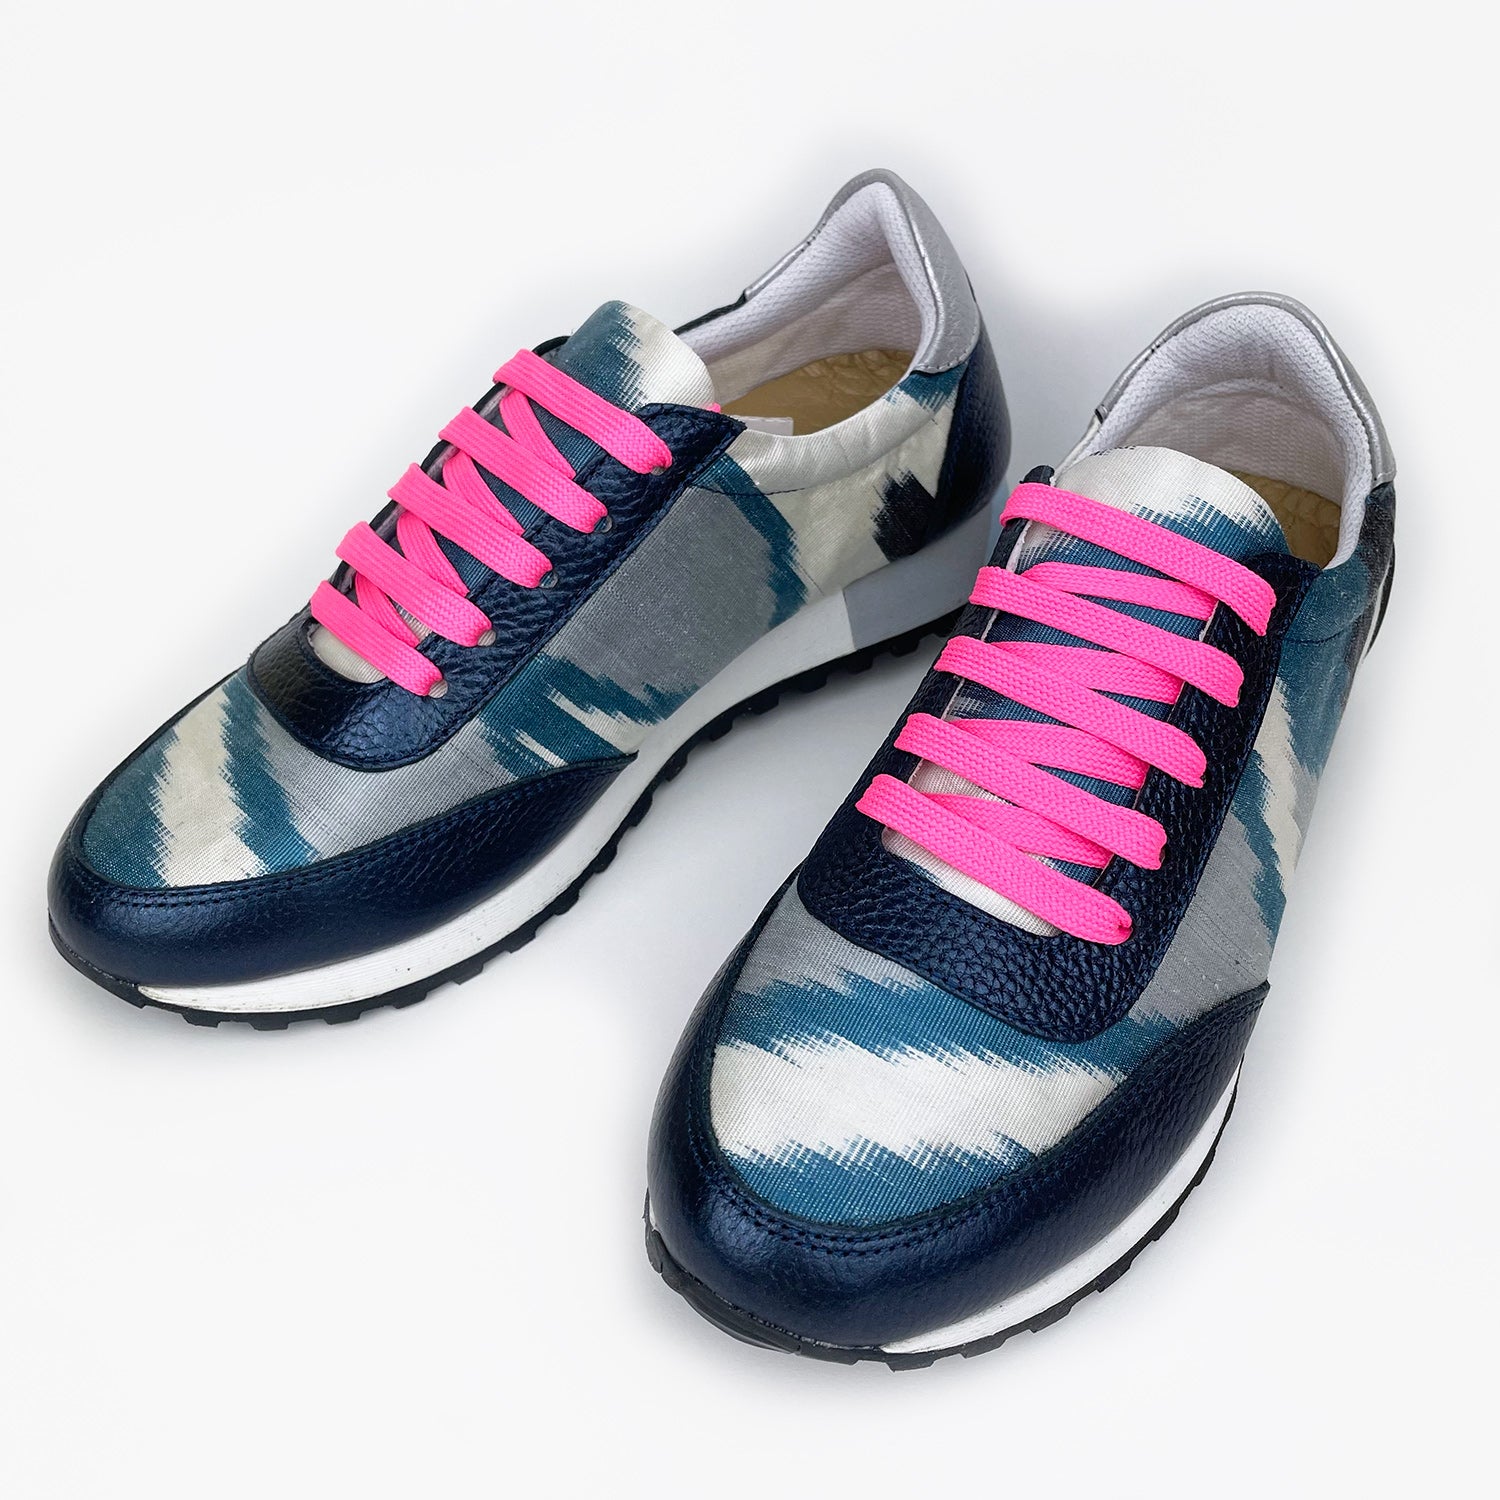 Blue and white Ikat silk trainers with navy metallic leather and pink laces 